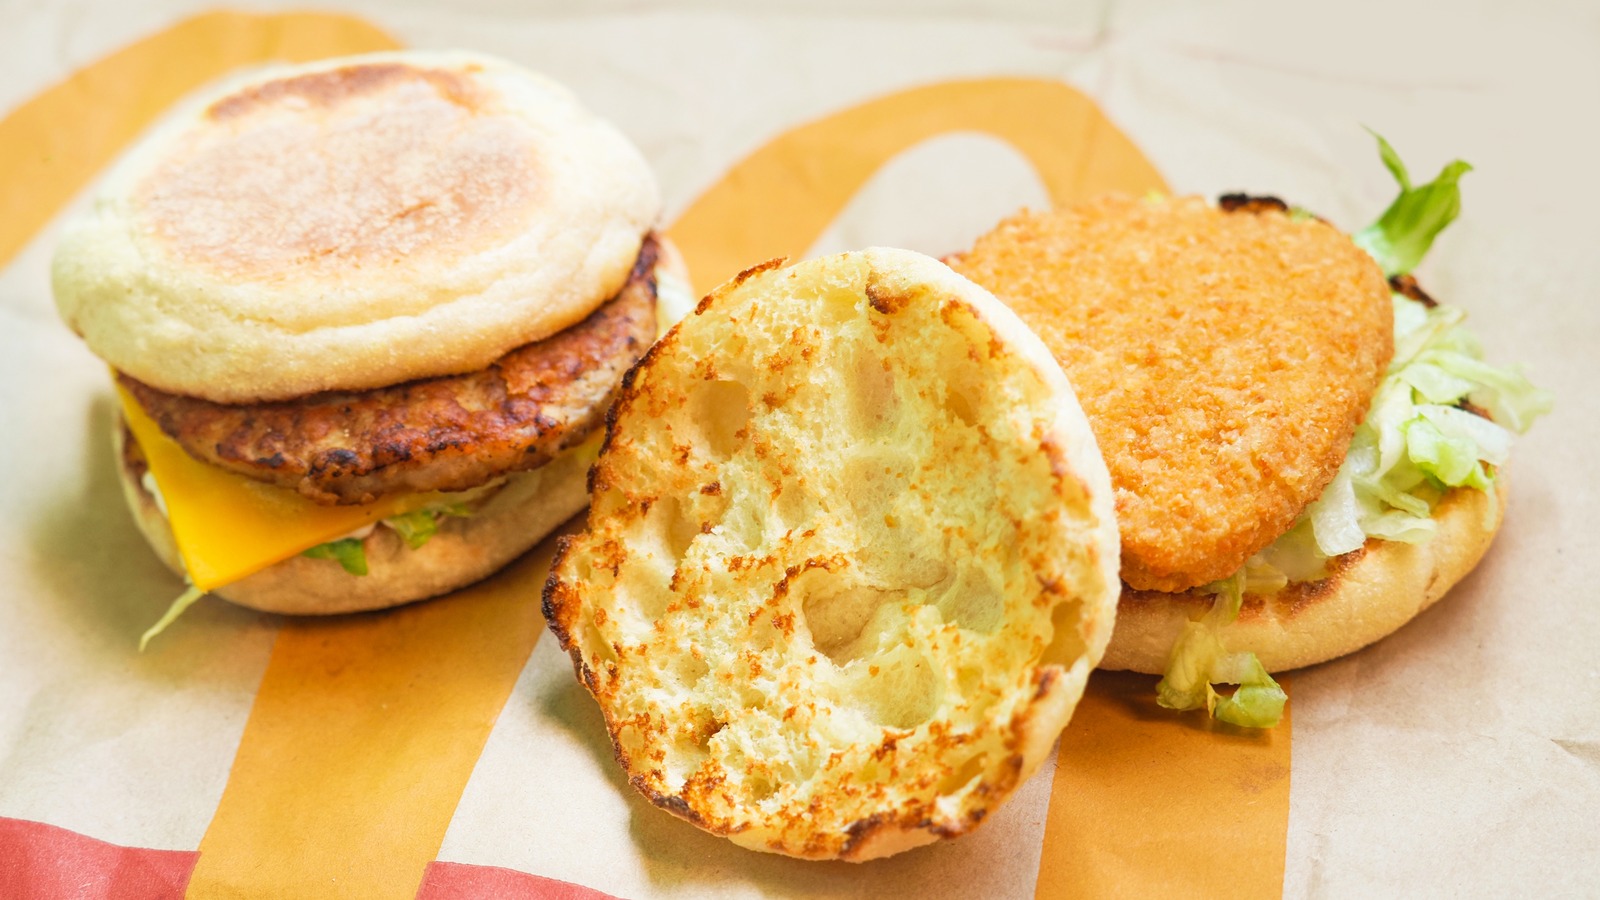 The McBrunch Burger Is A Real Meal At McDonald’s (If They’ll Let You Order It) – The Daily Meal